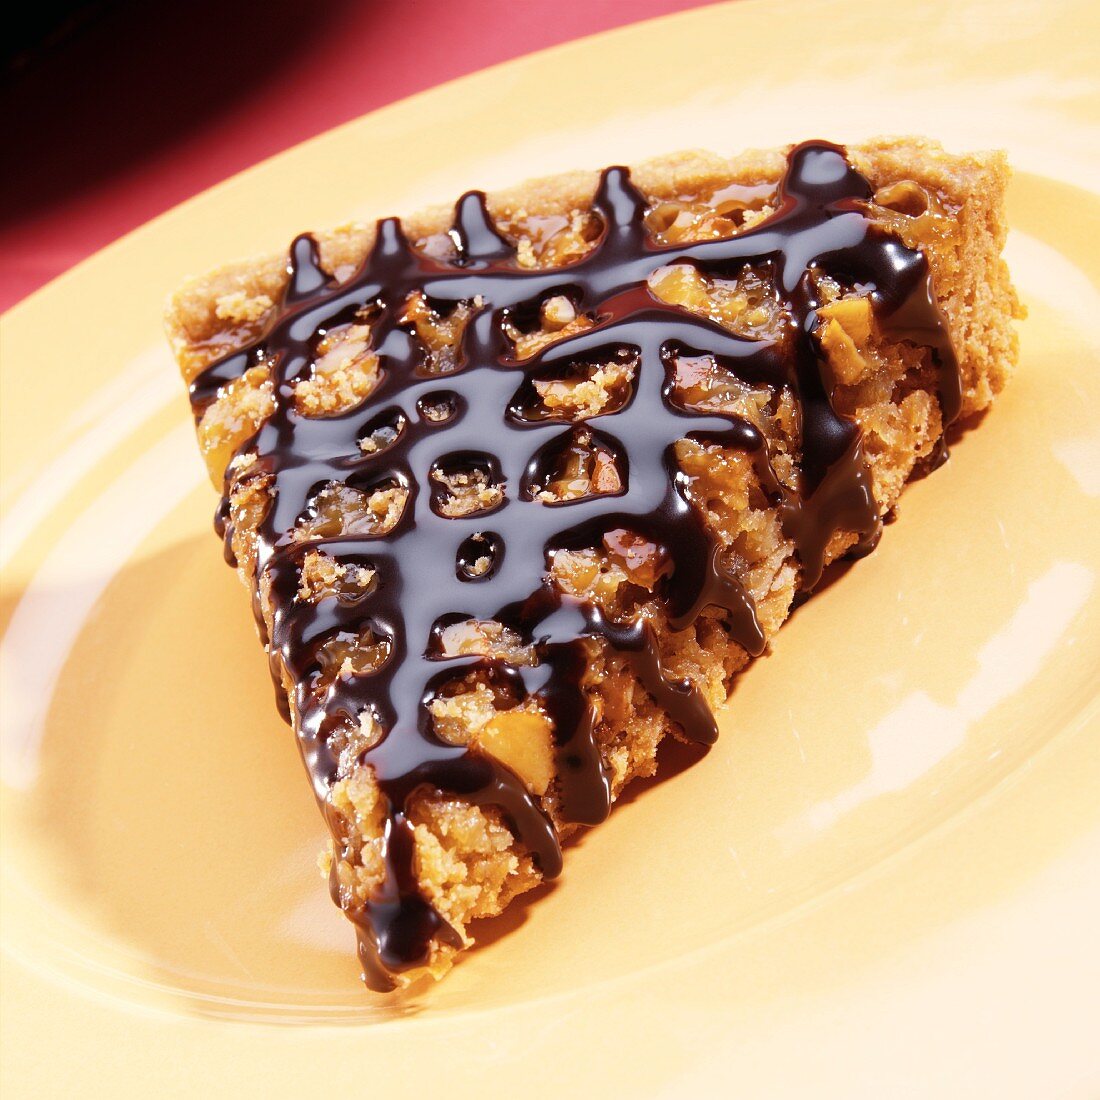 Slice of Pecan Tart with Chocolate Drizzle